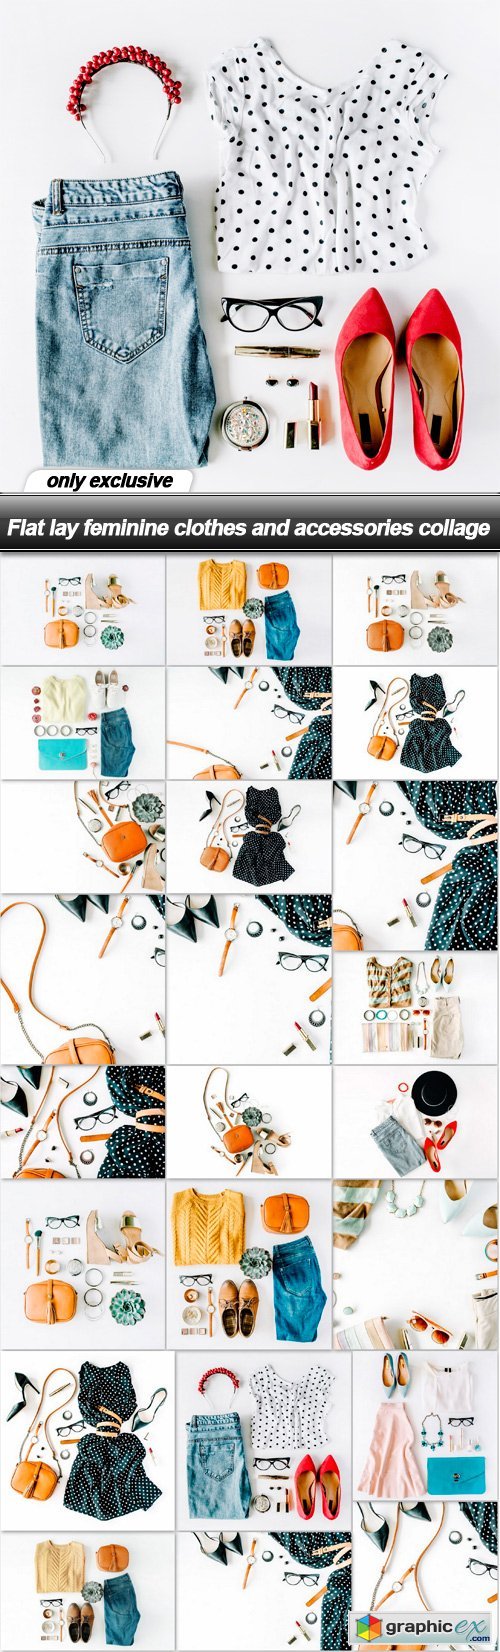 Flat lay feminine clothes and accessories collage - 24 UHQ JPEG